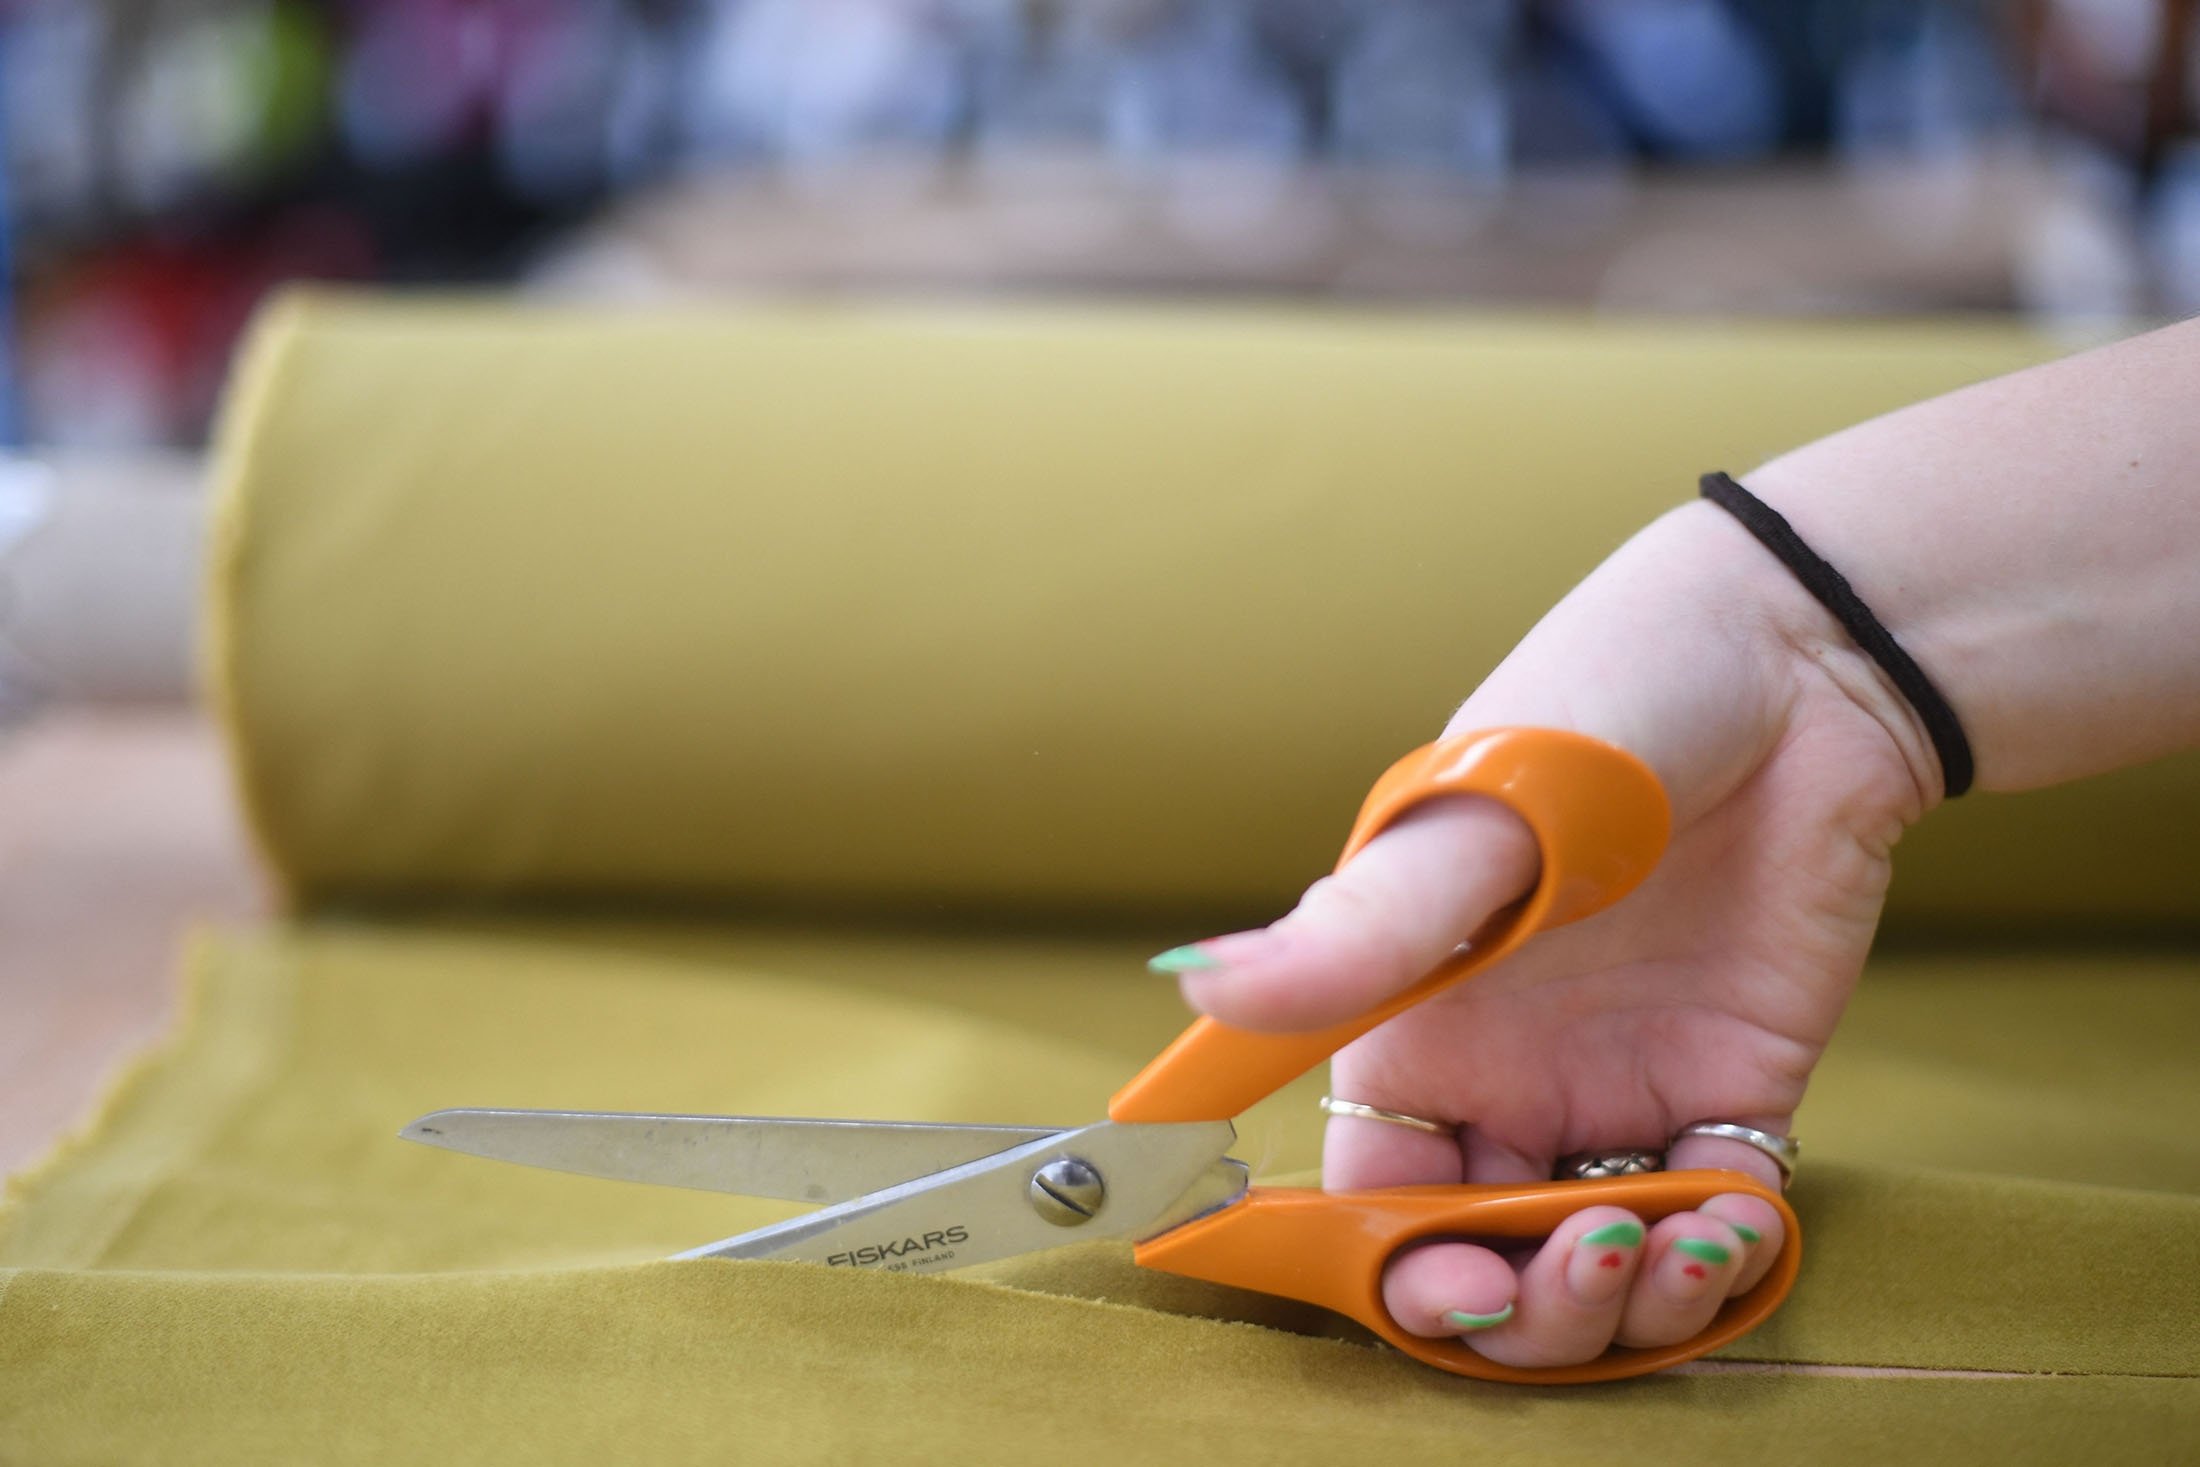 Molly cuts a piece of fabric for an online order at The New Craft House, a sewing workshop studio and designer deadstock fabric shop, in Hackney, East London, U.K., Feb. 11, 2022. (AFP Photo)